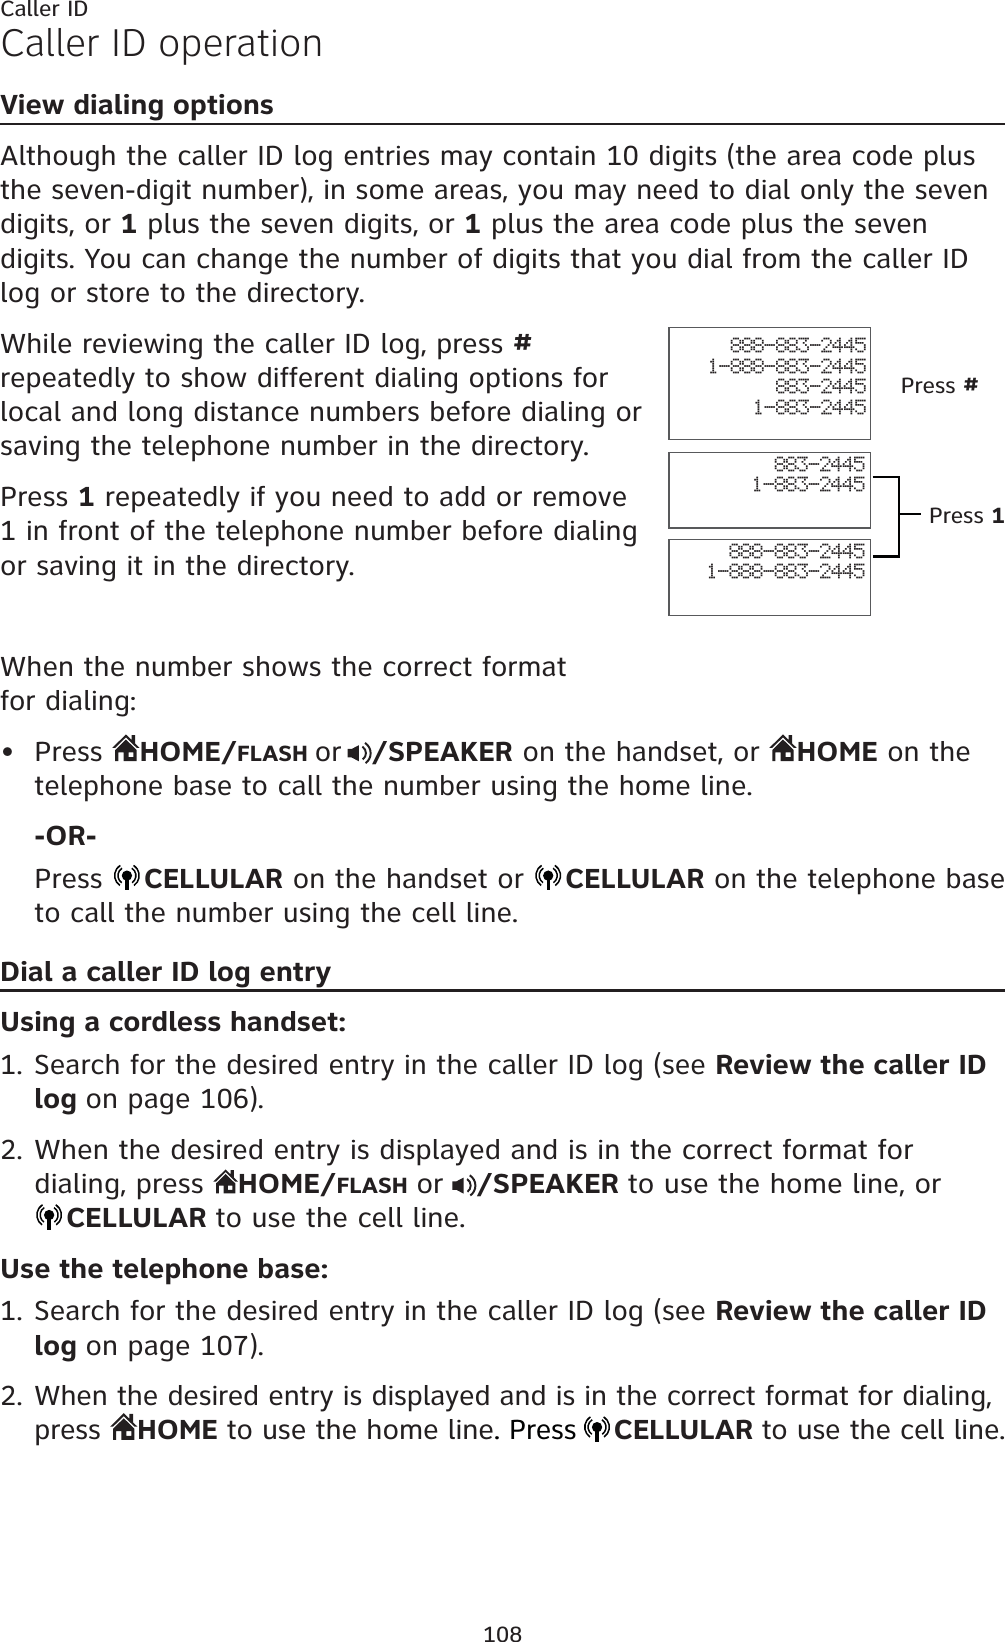 108Caller IDCaller ID operationView dialing optionsAlthough the caller ID log entries may contain 10 digits (the area code plus the seven-digit number), in some areas, you may need to dial only the seven digits, or 1 plus the seven digits, or 1 plus the area code plus the seven digits. You can change the number of digits that you dial from the caller ID log or store to the directory. While reviewing the caller ID log, press #repeatedly to show different dialing options for local and long distance numbers before dialing or saving the telephone number in the directory.Press 1 repeatedly if you need to add or remove 1 in front of the telephone number before dialing or saving it in the directory.When the number shows the correct format for dialing:Press  HOME/FLASH or /SPEAKER on the handset, or  HOME on the telephone base to call the number using the home line.-OR-Press  CELLULAR on the handset or  CELLULAR on the telephone base to call the number using the cell line.Dial a caller ID log entryUsing a cordless handset:Search for the desired entry in the caller ID log (see Review the caller ID log on page 106).When the desired entry is displayed and is in the correct format for dialing, press  HOME/FLASHor /SPEAKER to use the home line, orCELLULAR to use the cell line.Use the telephone base:Search for the desired entry in the caller ID log (see Review the caller ID log on page 107).When the desired entry is displayed and is in the correct format for dialing, press  HOME to use the home line. PressCELLULARto use the cell line.•1.2.1.2.888-883-24451-888-883-2445883-24451-883-2445888-883-24451-888-883-2445883-24451-883-2445Press #Press 1